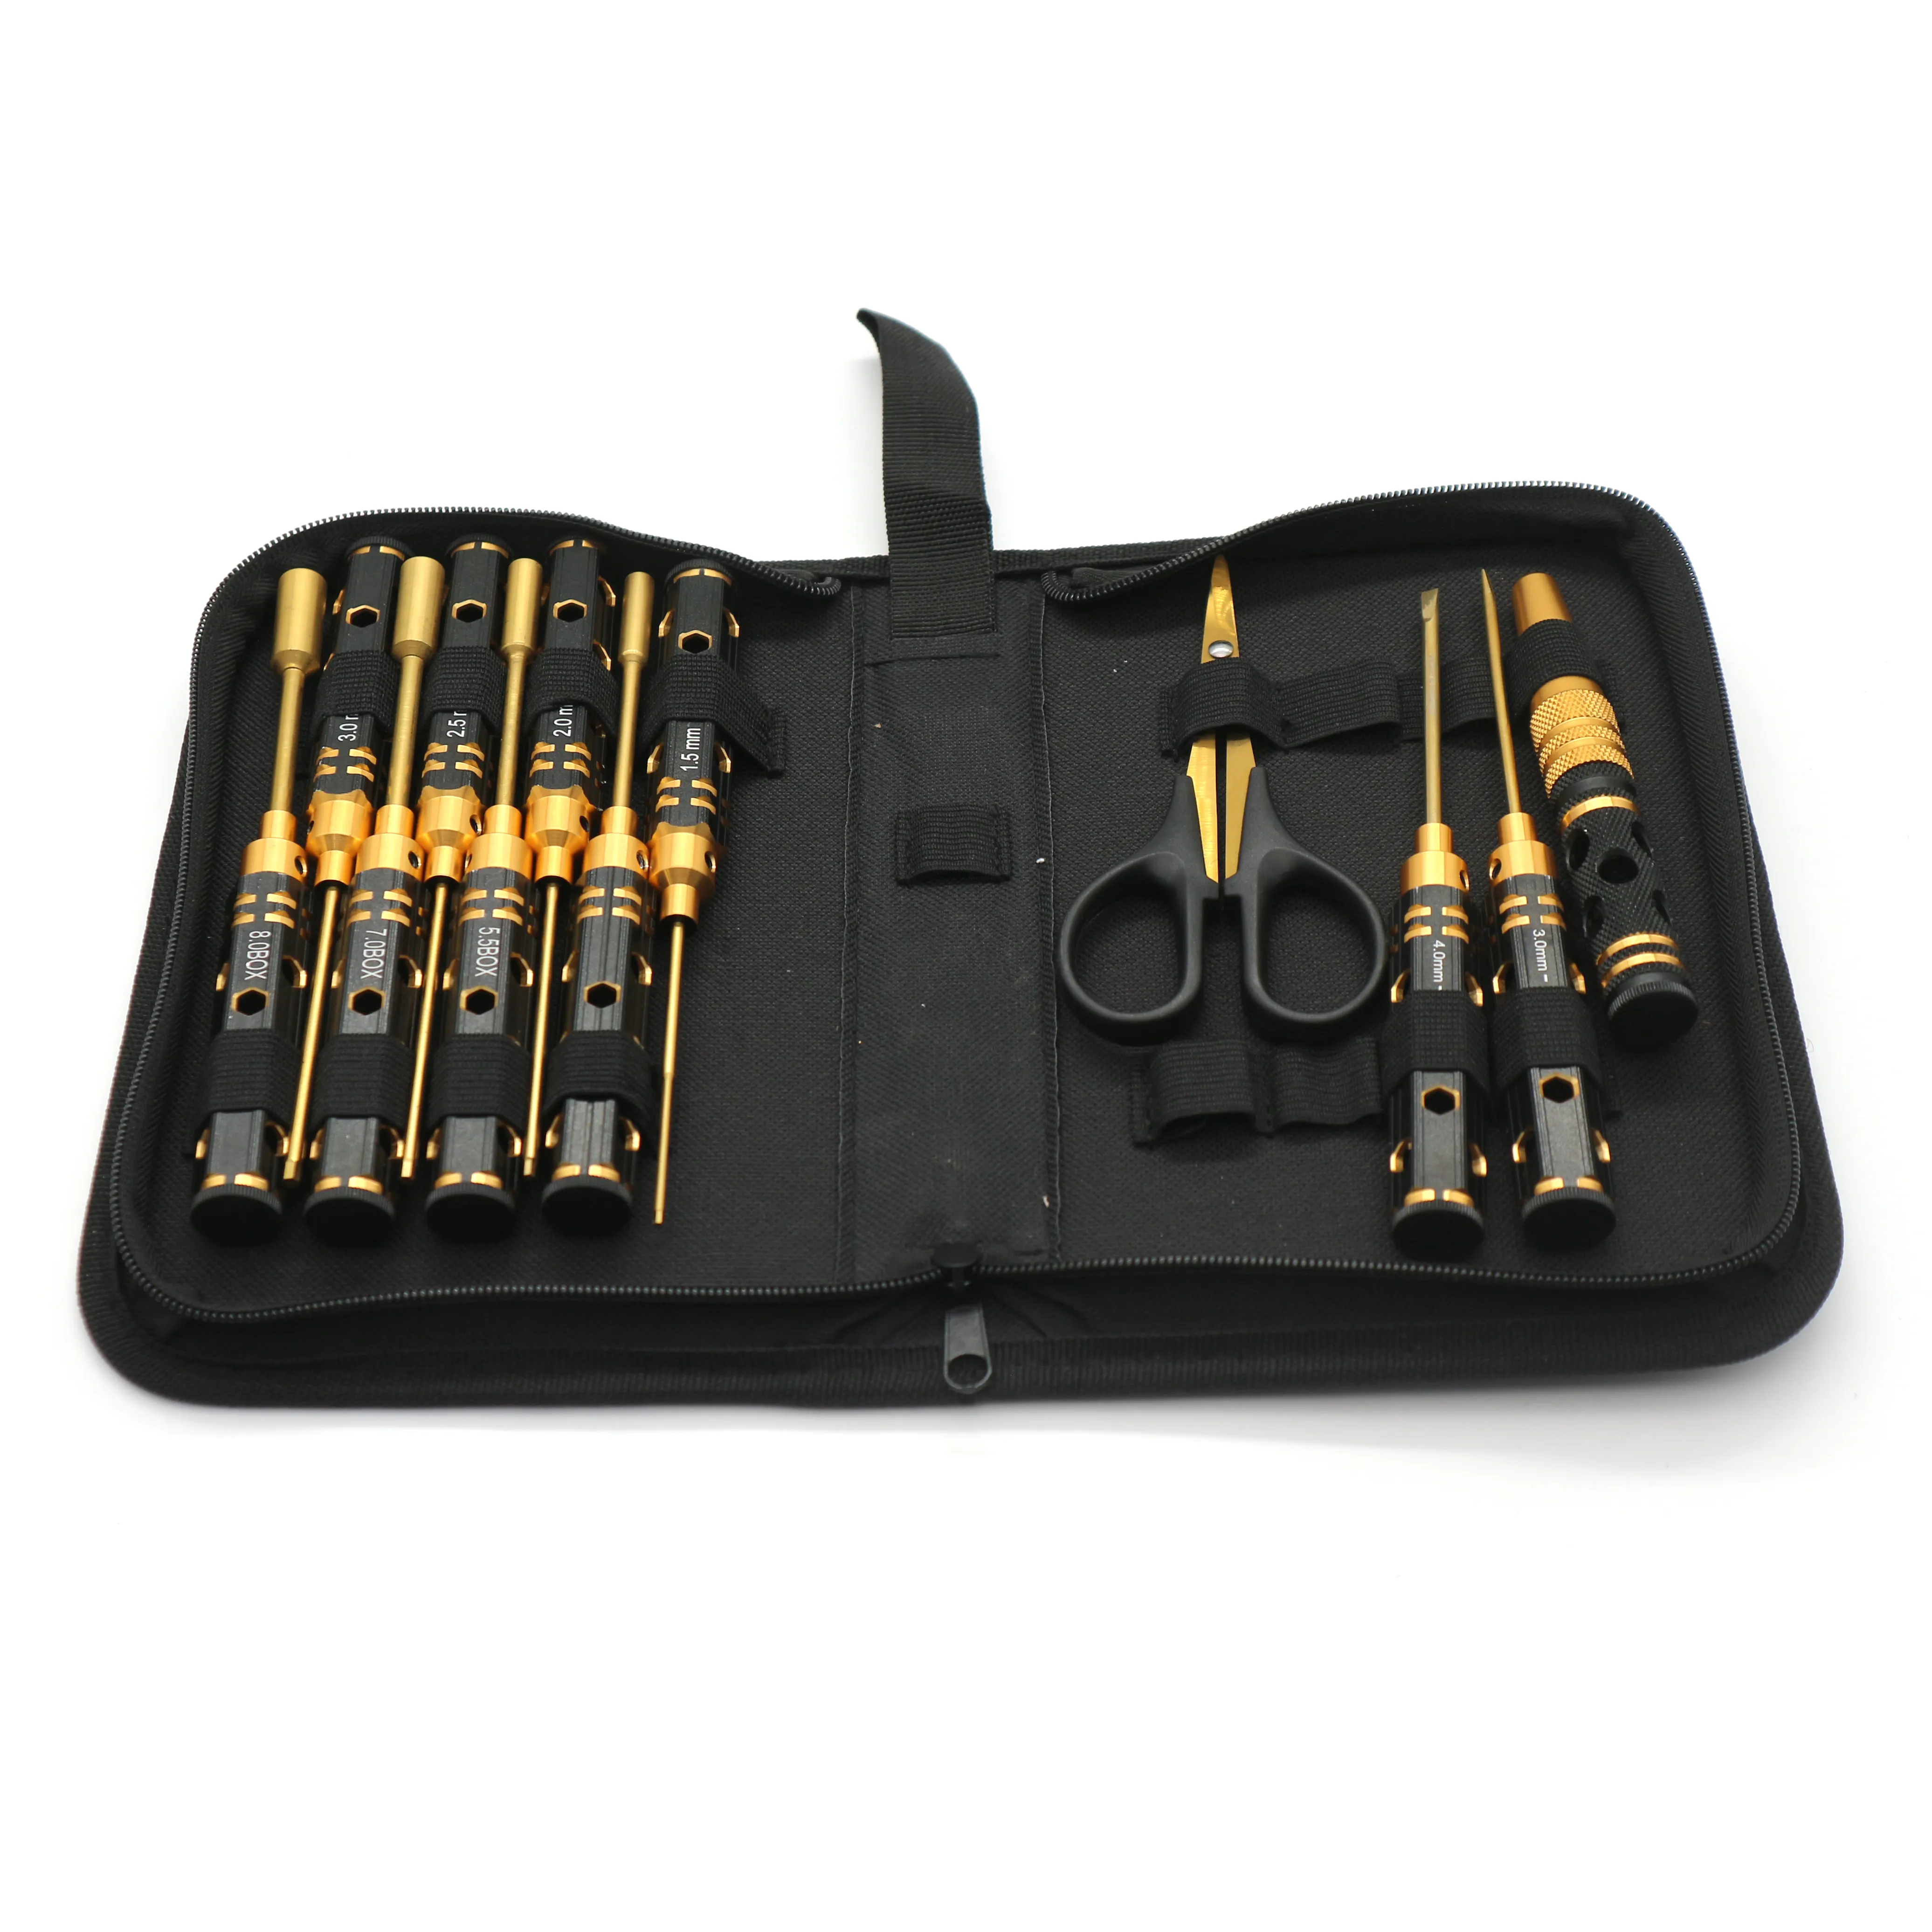 12pcs Remote Control Toy Model Toy Tool Kit External Hexagon Screw Internal Hexagon Screwdriver With Hole Saw Rc Repair Tool